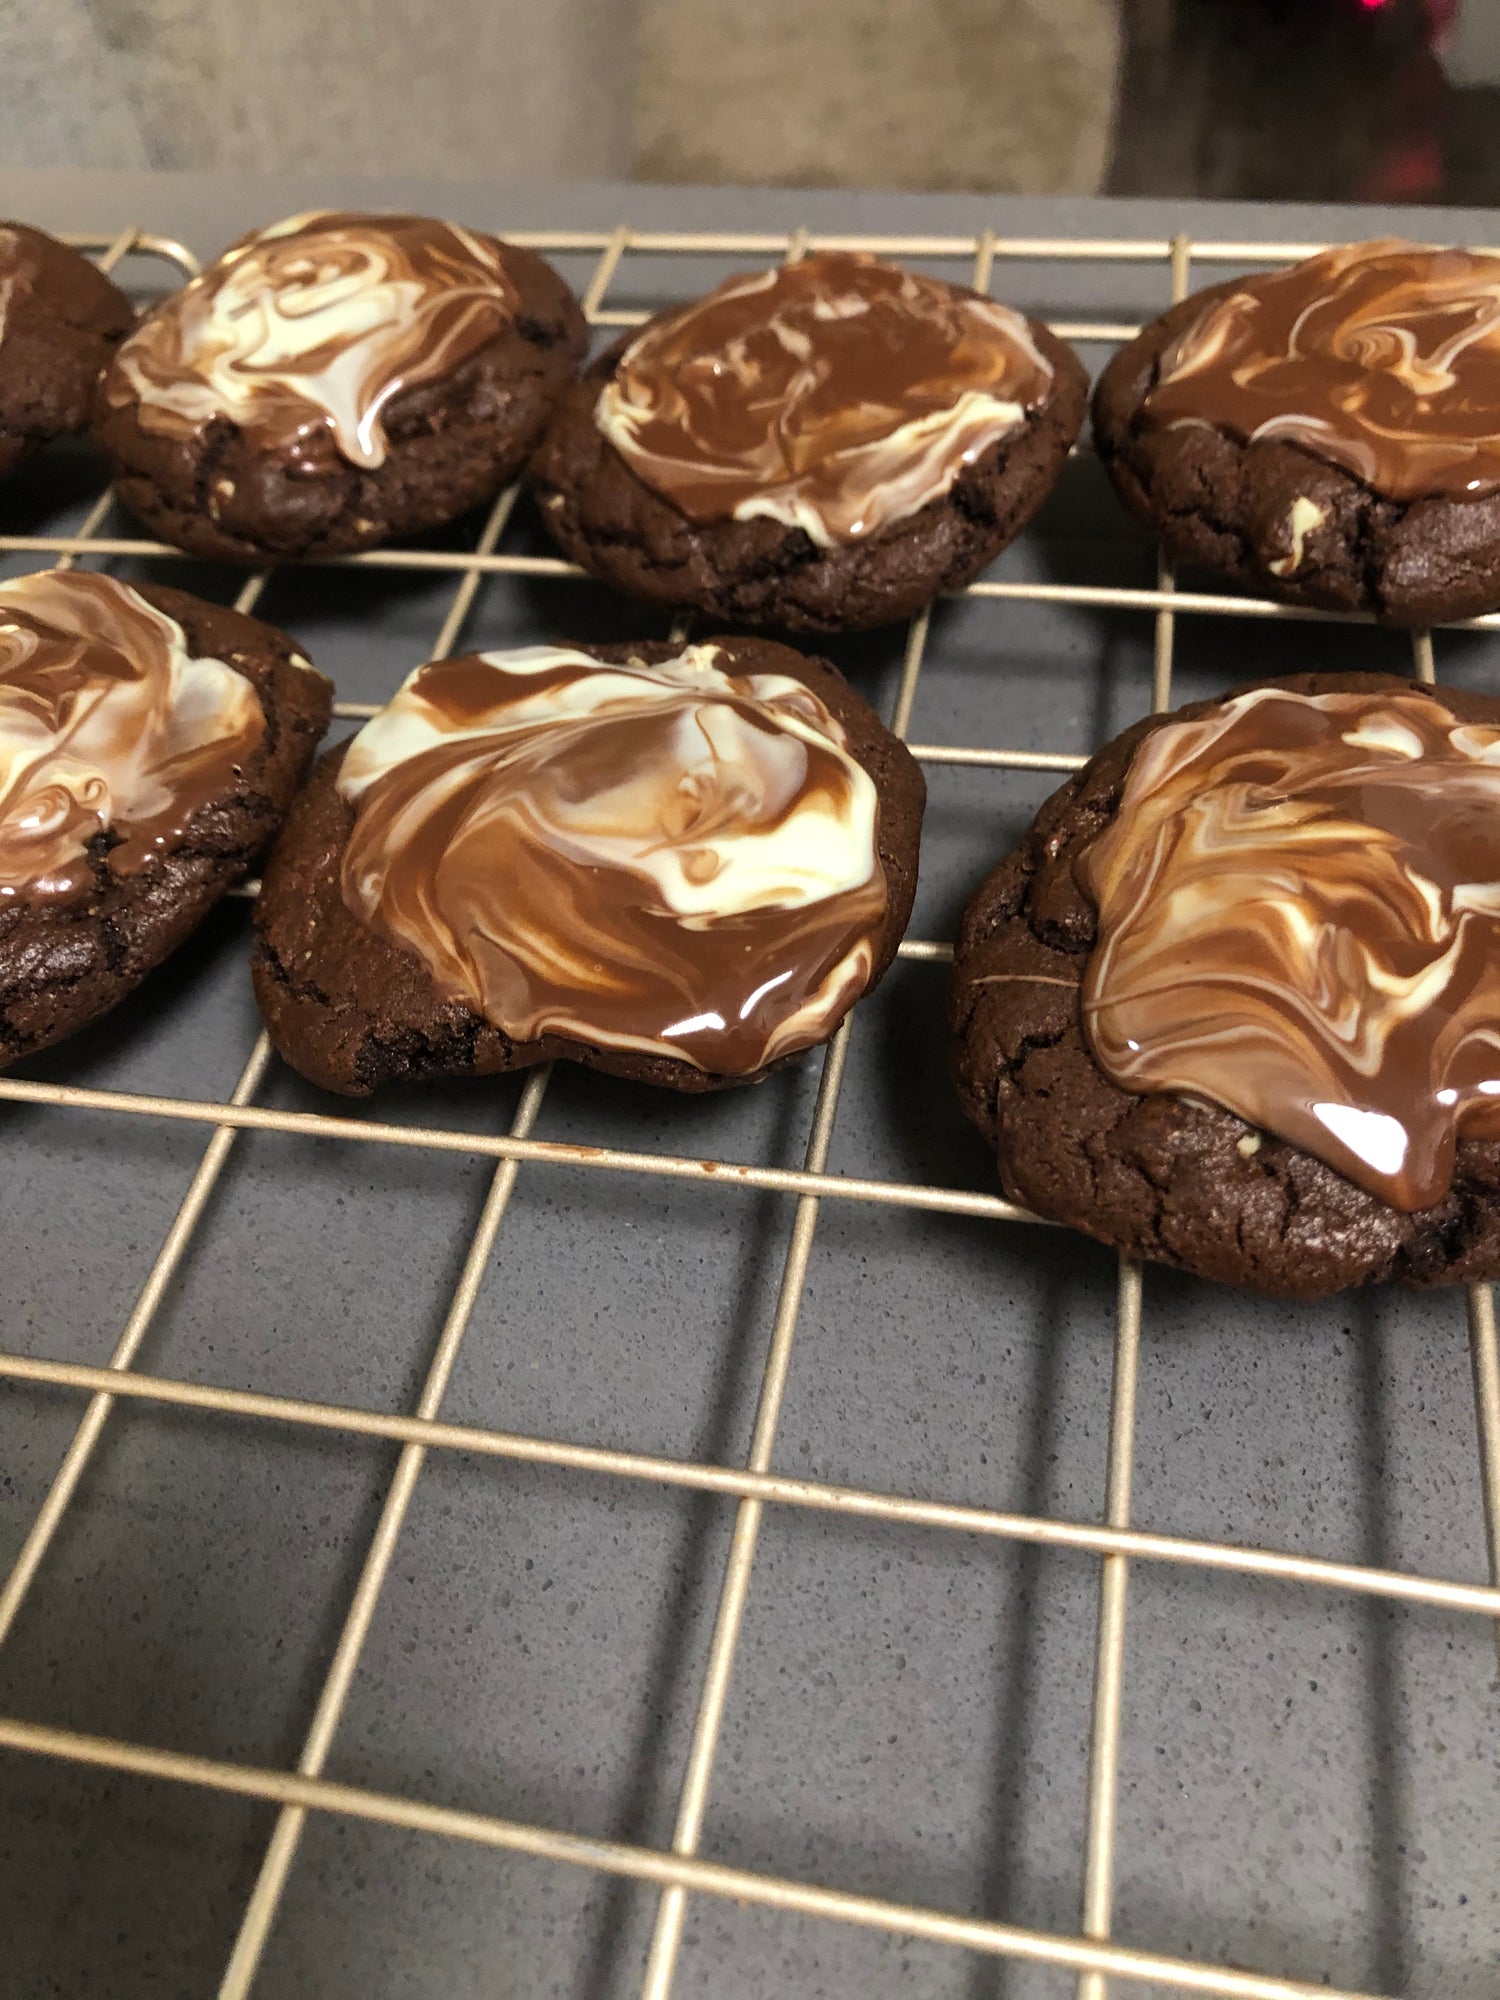 andes mint cookies